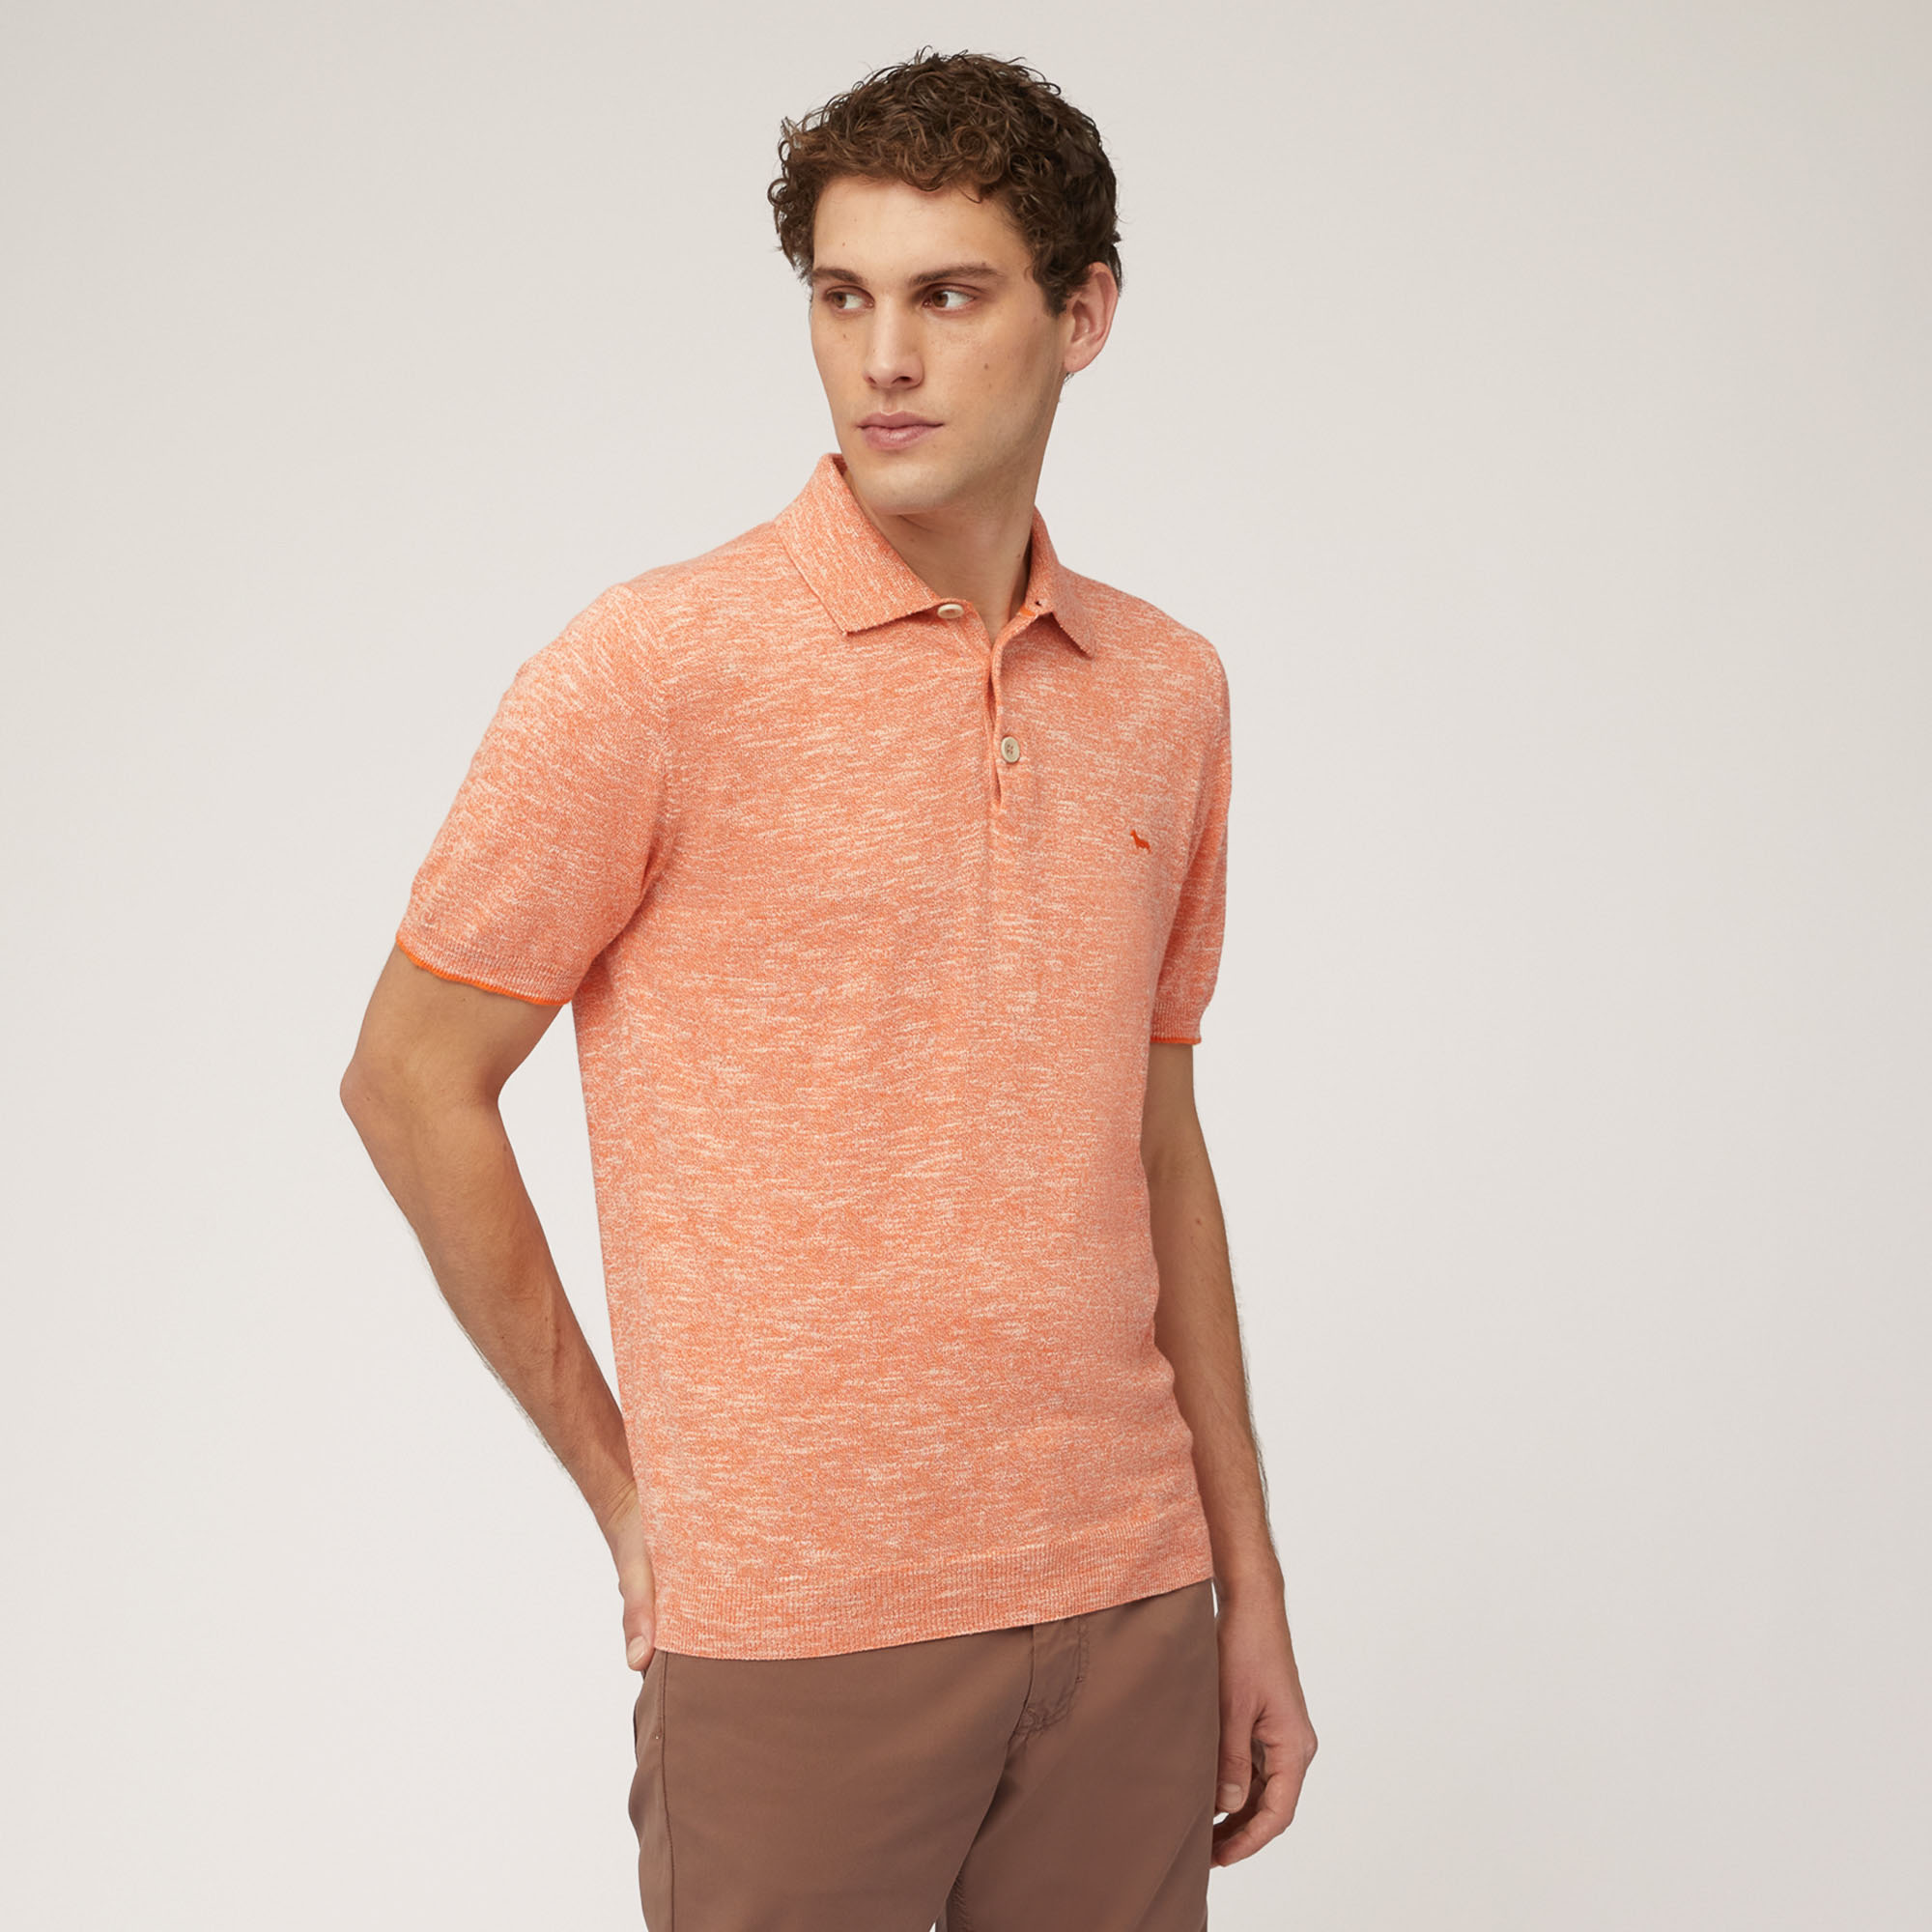 Cotton and Linen Tweed Polo, Orange, large